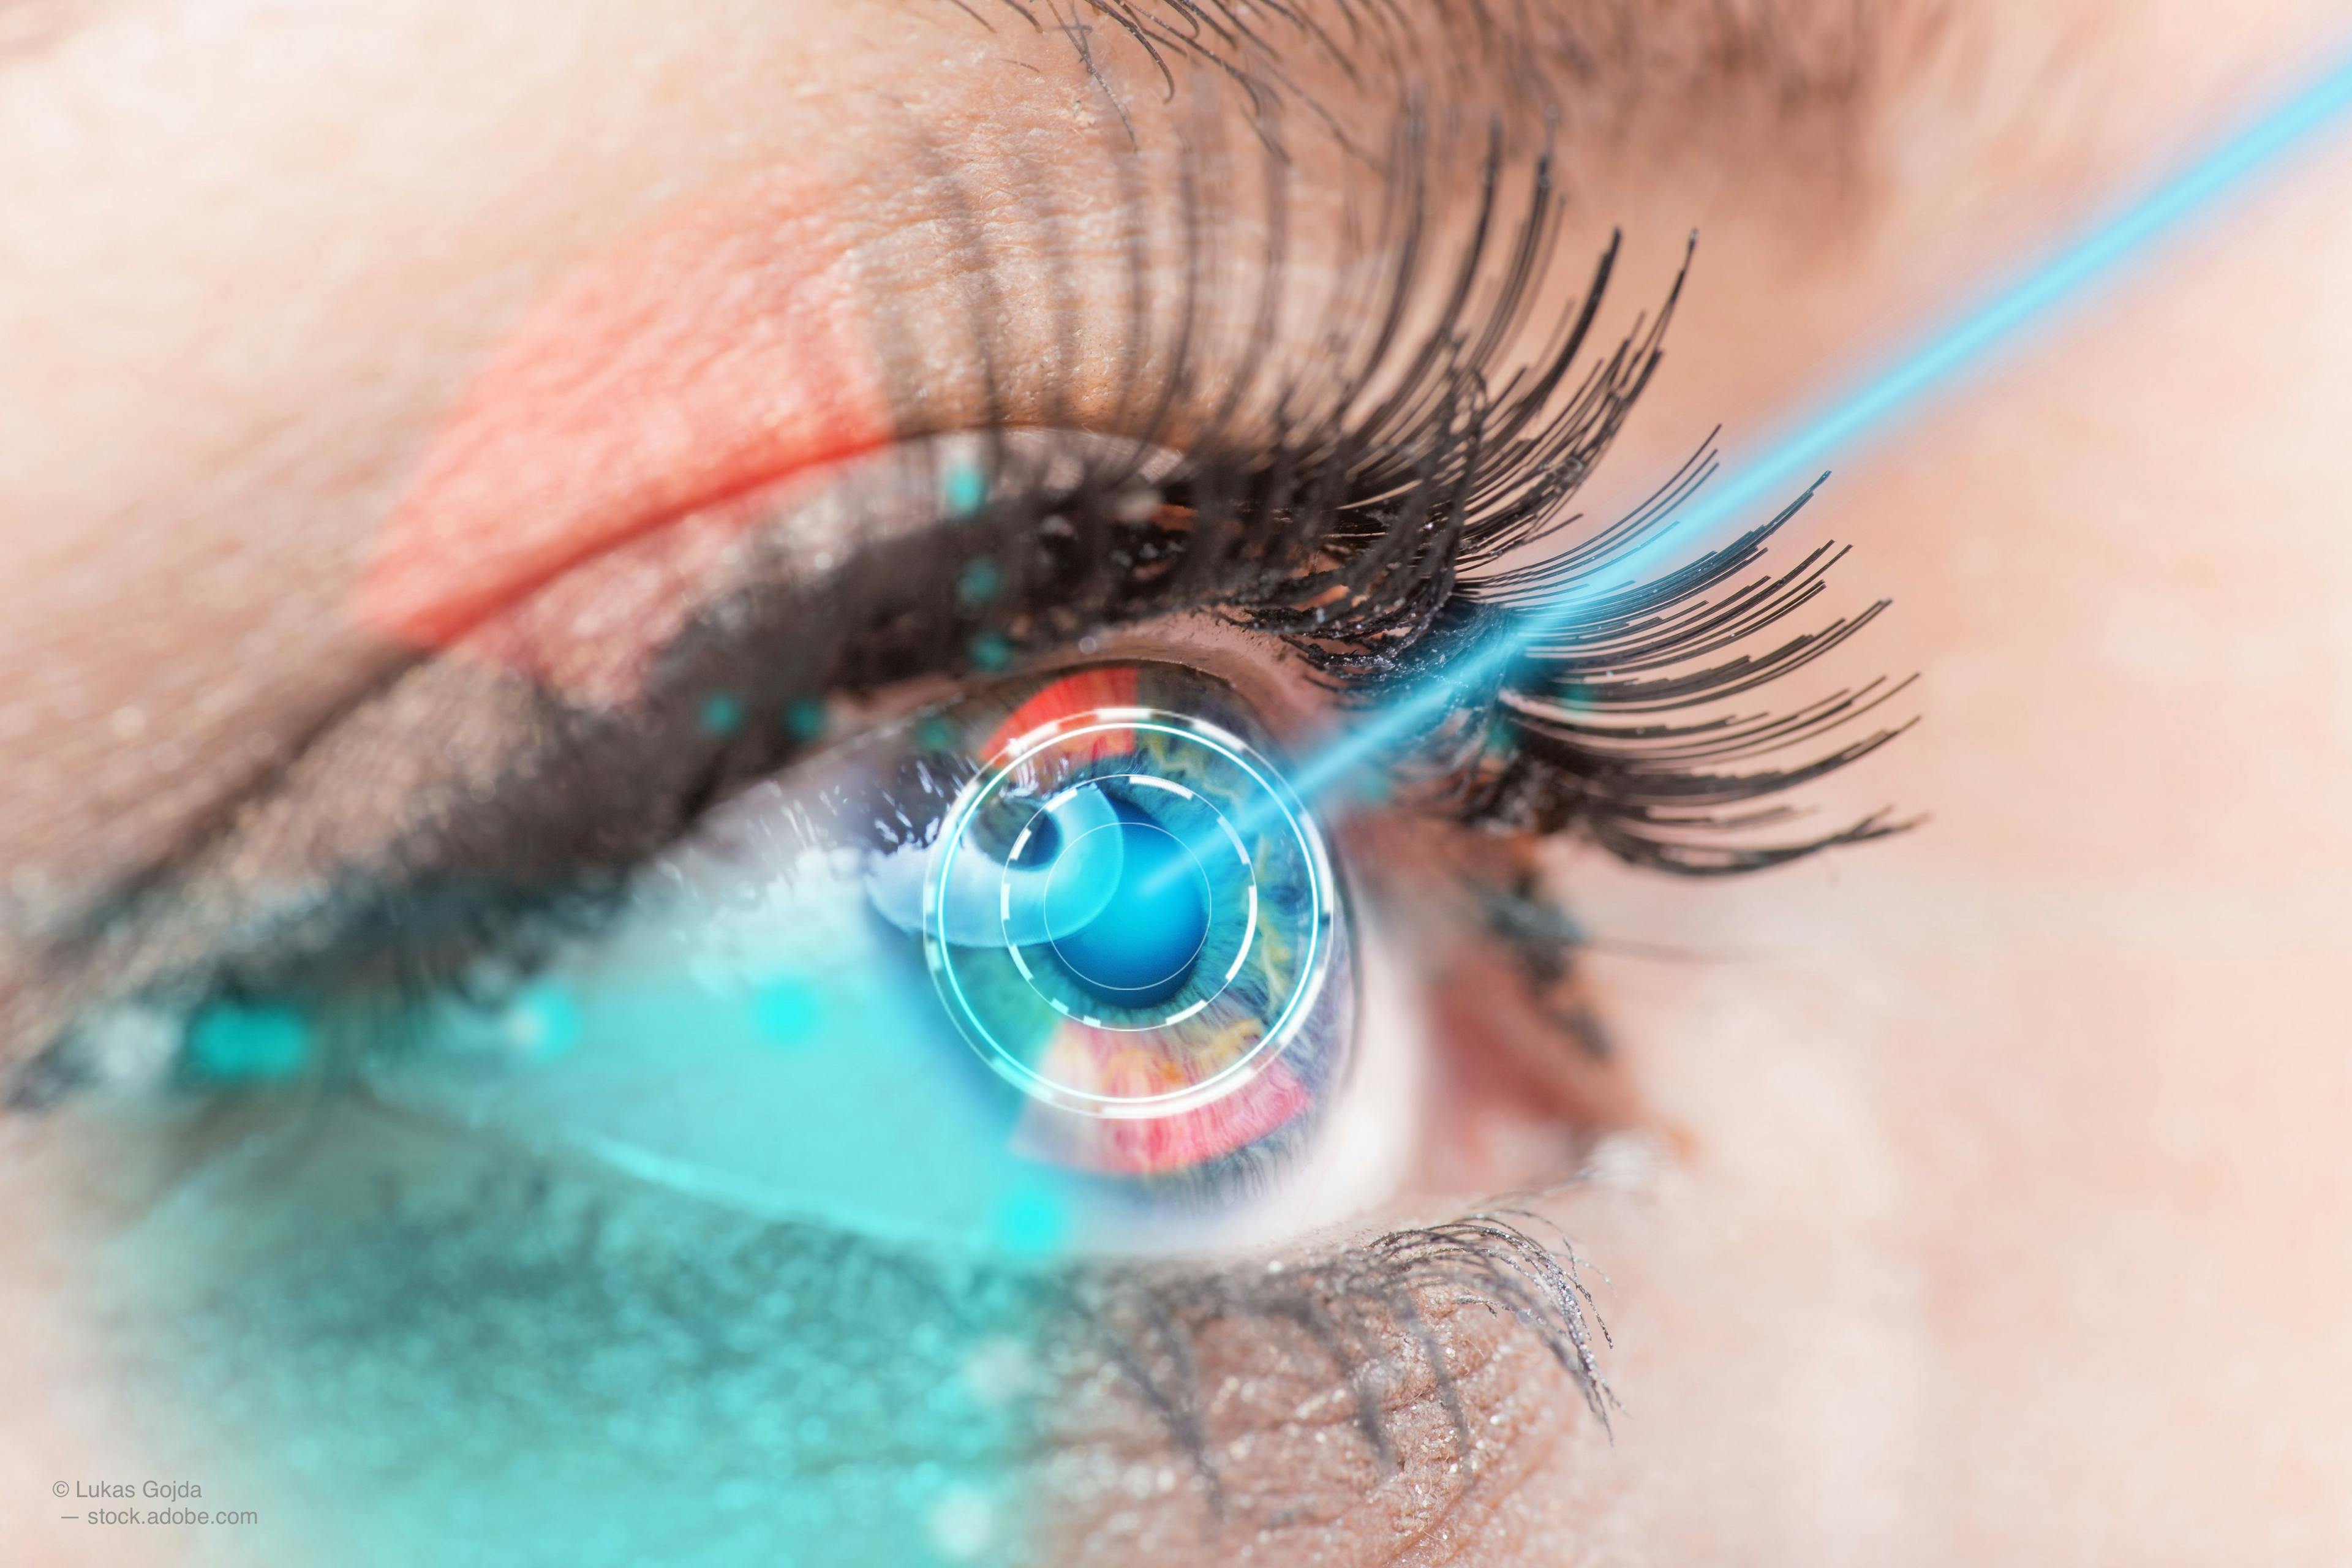  Prof. Ben Burton detailed how dry AMD patients treated with photobiomodulation therapy have seen improvements in best-corrected visual acuity 9 months after treatment. 